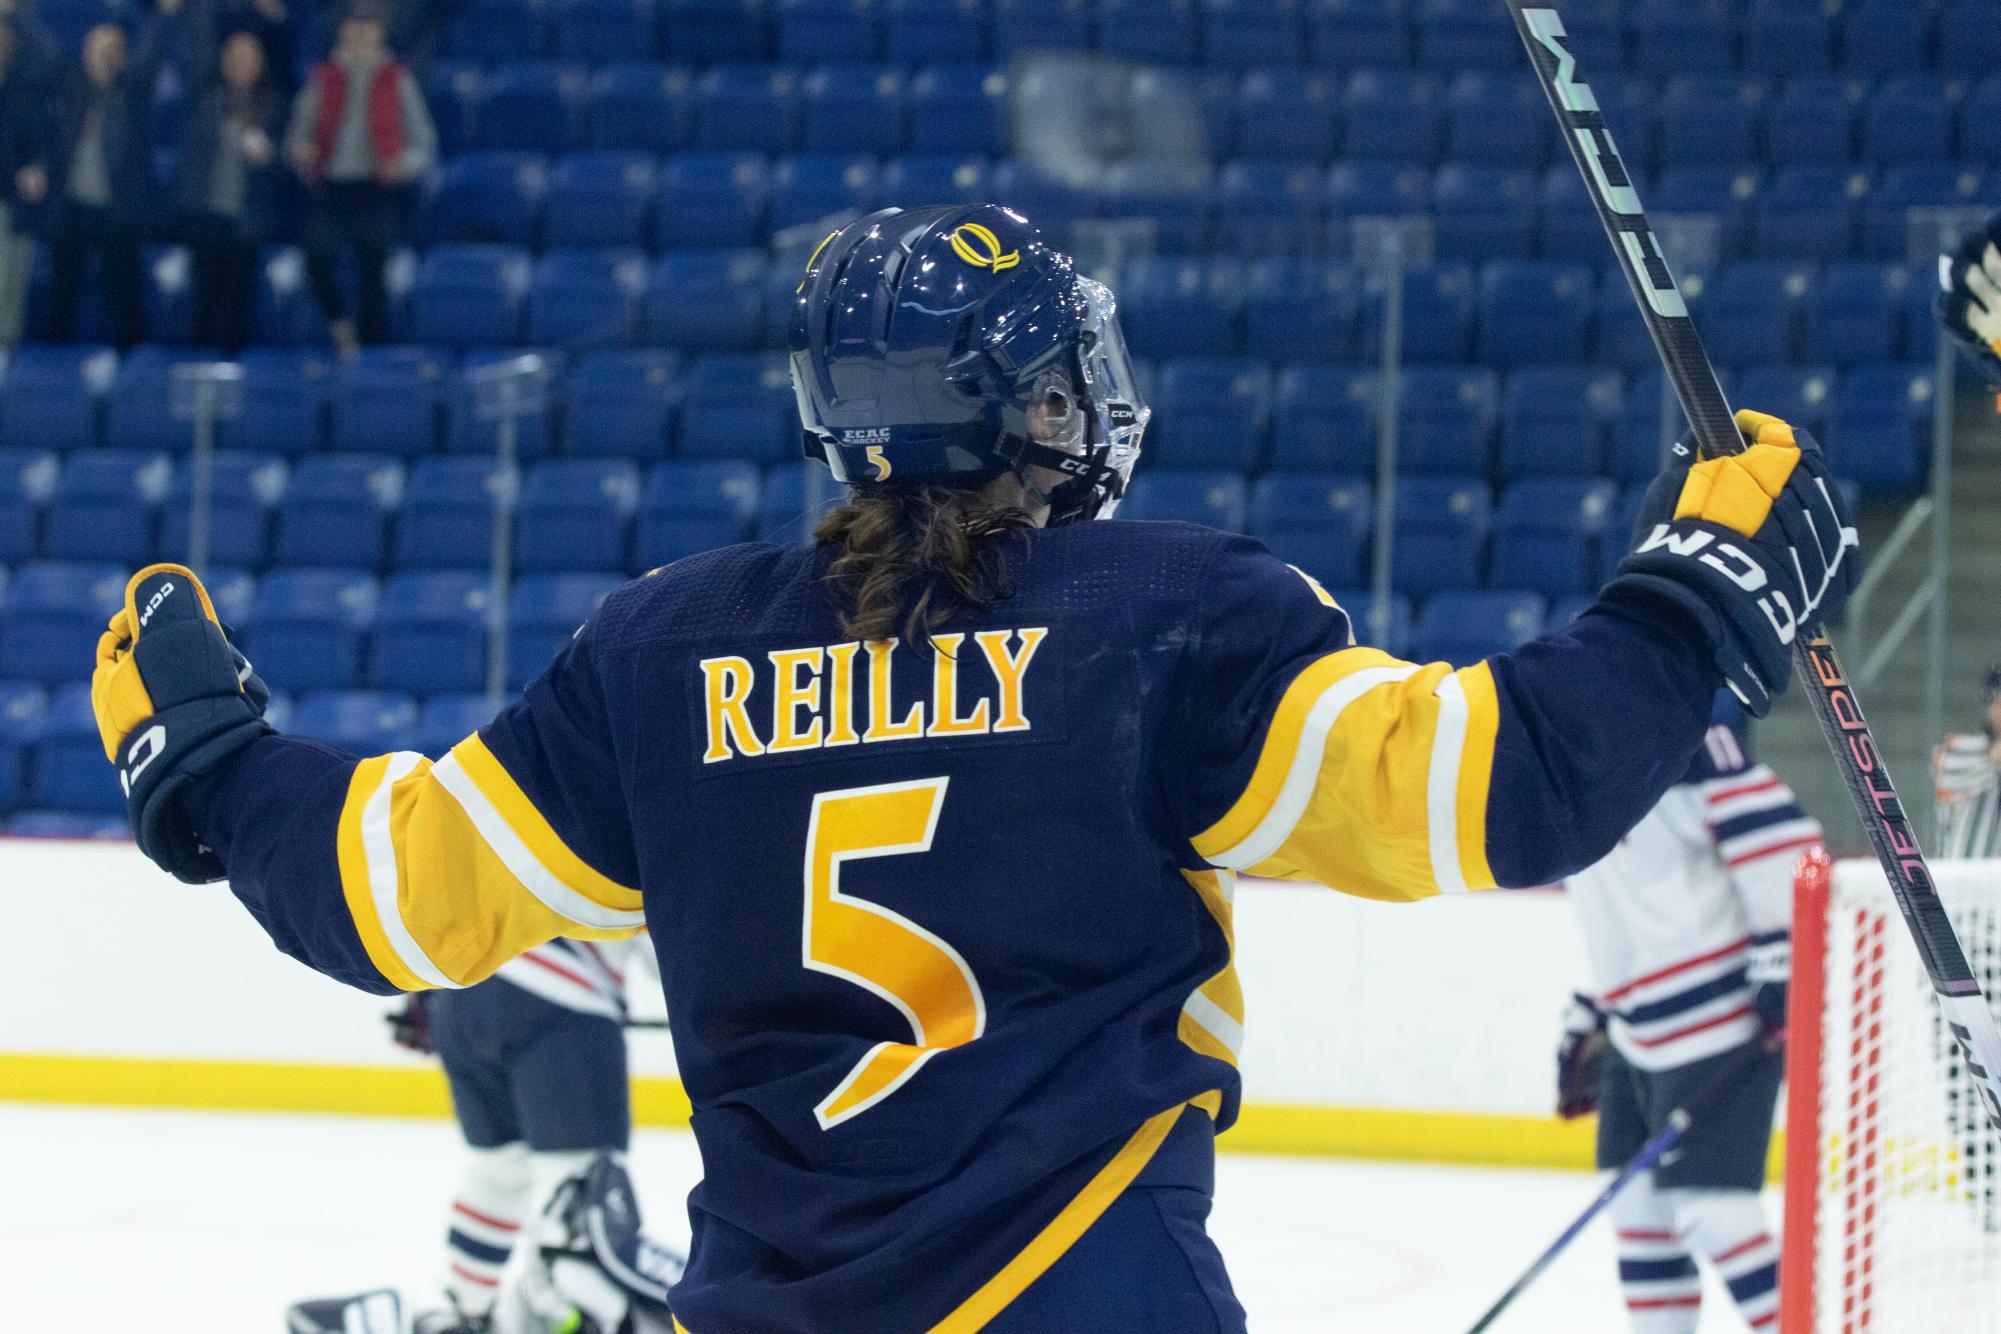 Graduate defender Kate Reilly scored the game-winning goal in Quinnipiac 4-3 exhibition win over UConn.